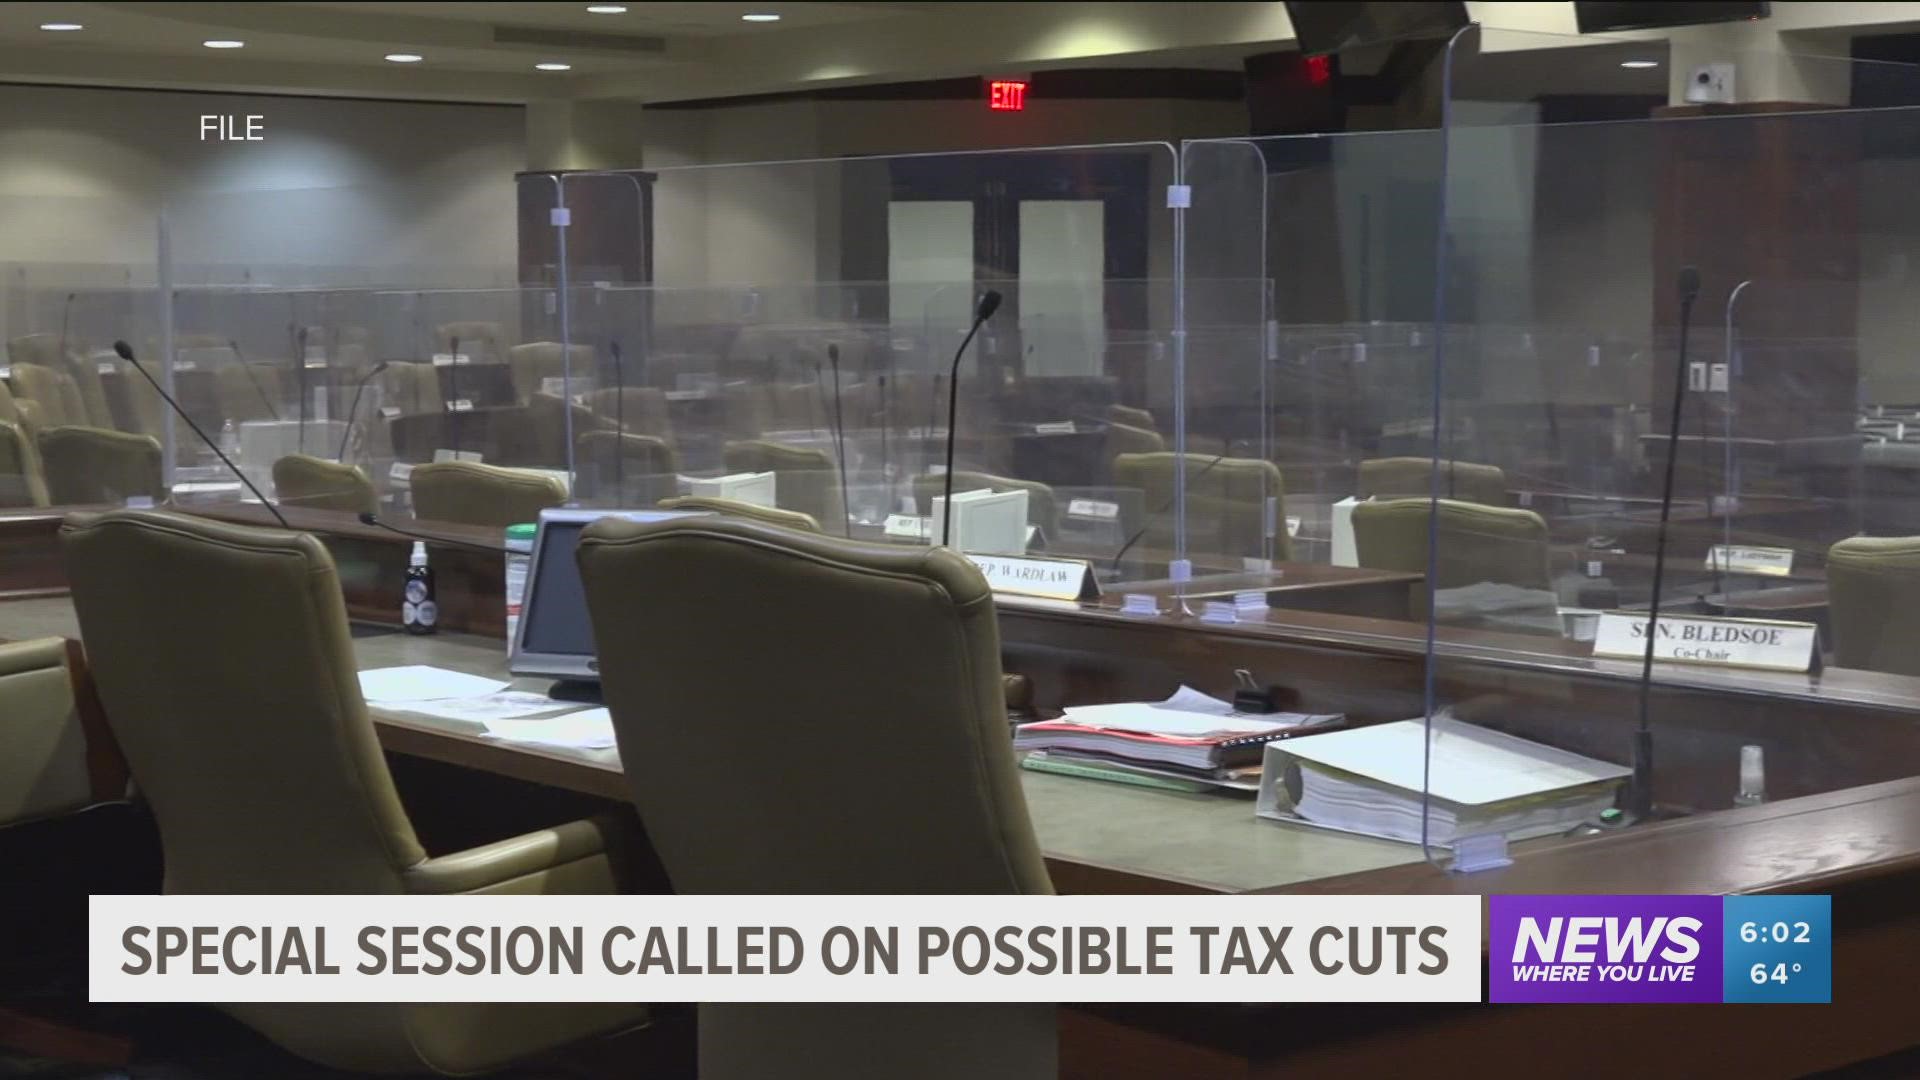 On Tuesday, Nov. 30, Governor Asa Hutchinson announced a special legislative session with tax cuts the main item being discussed.